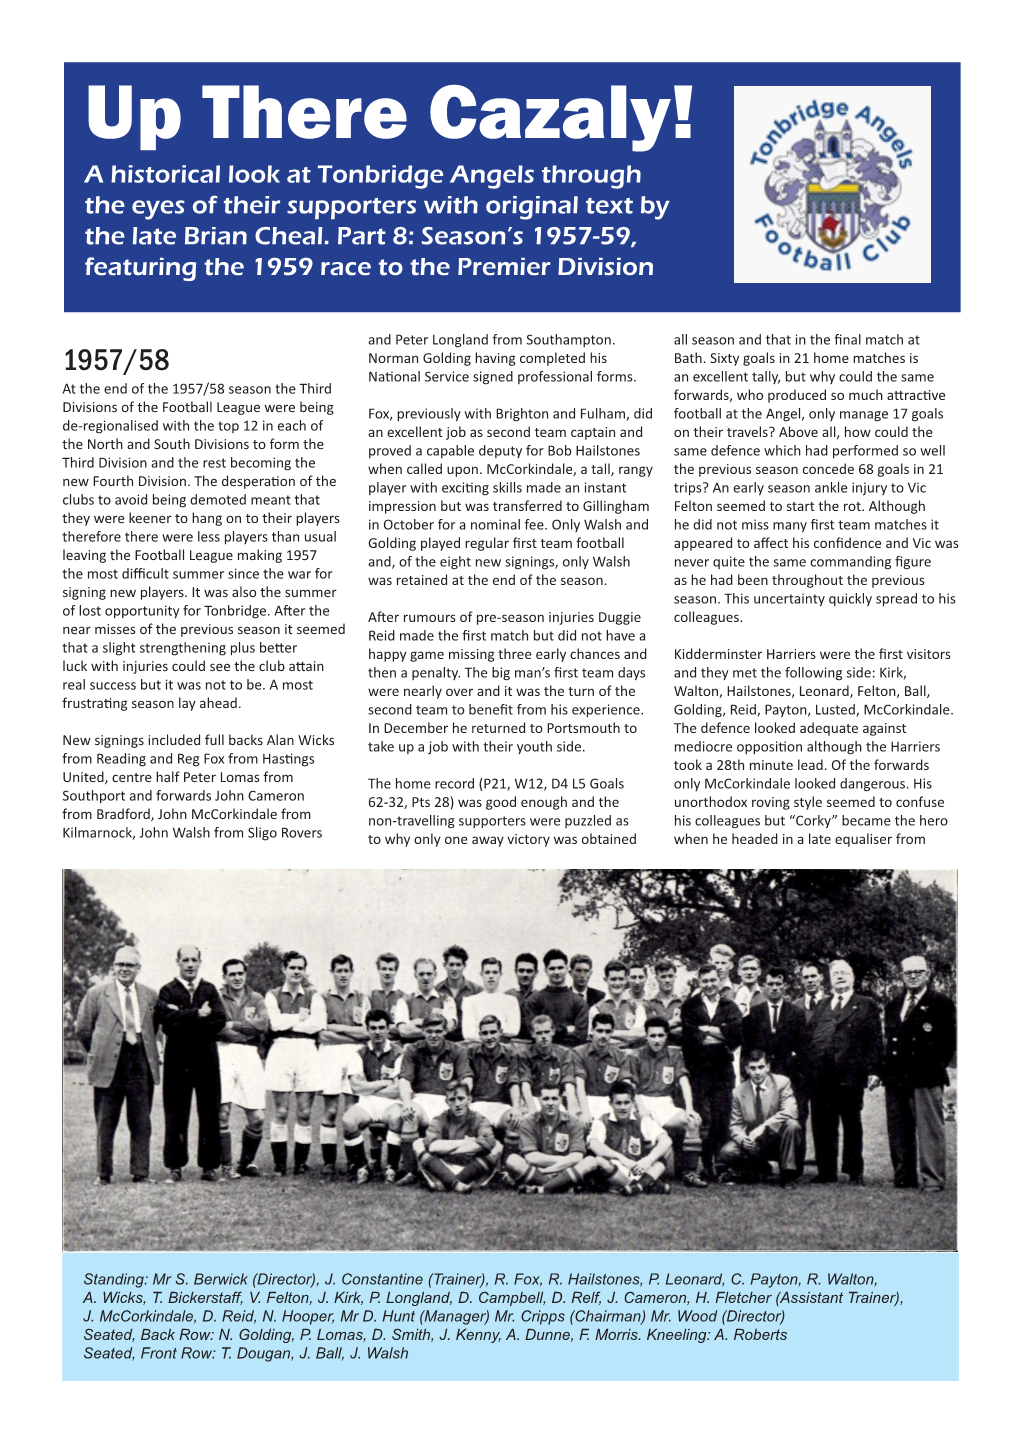 Up There Cazaly! a Historical Look at Tonbridge Angels Through the Eyes of Their Supporters with Original Text by the Late Brian Cheal